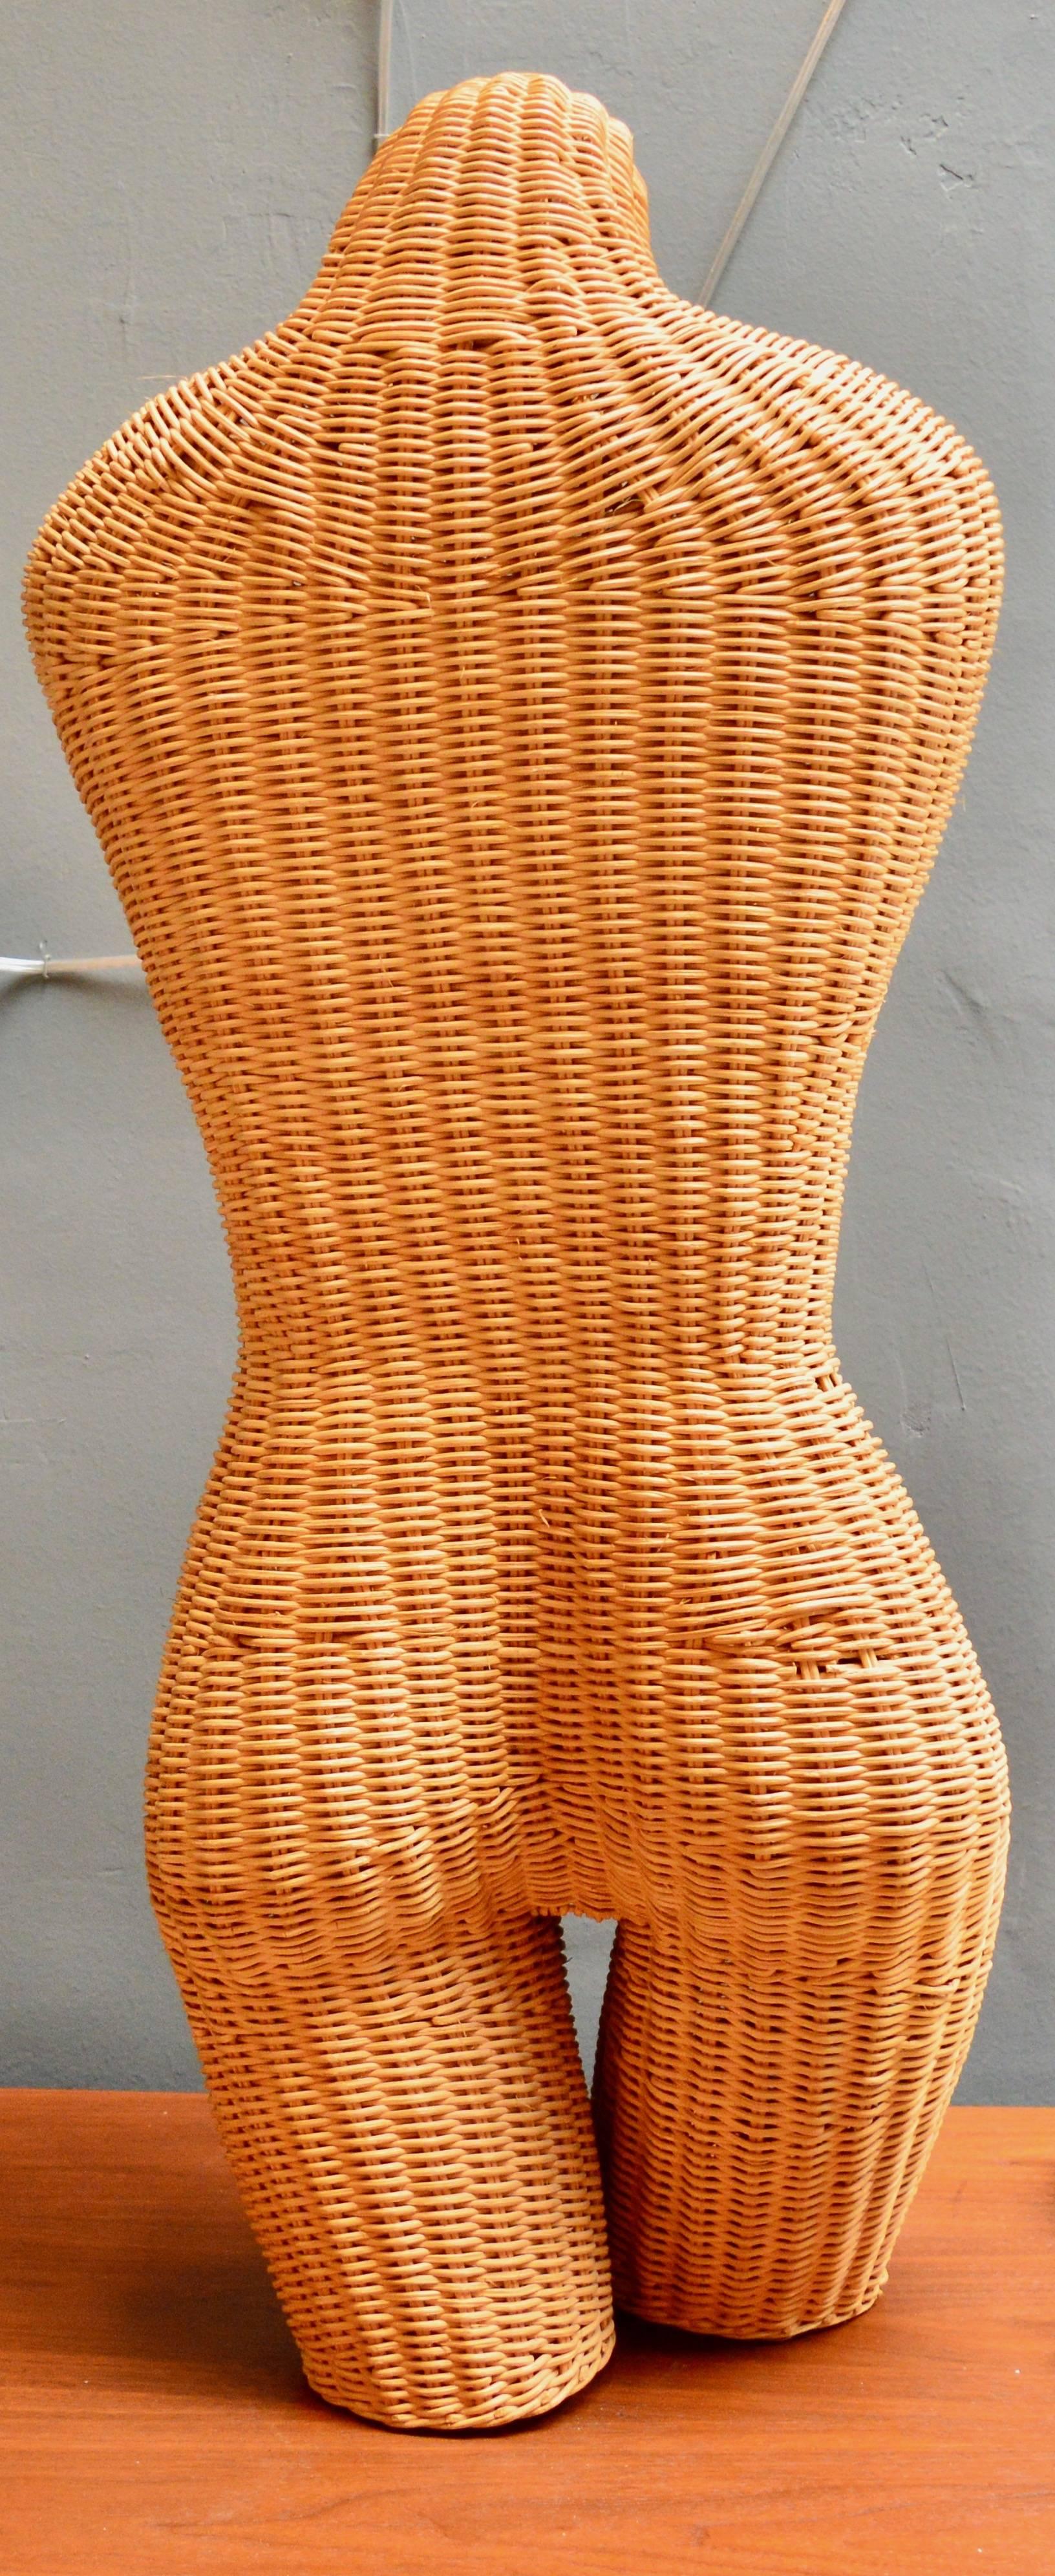 wicker mannequin for sale